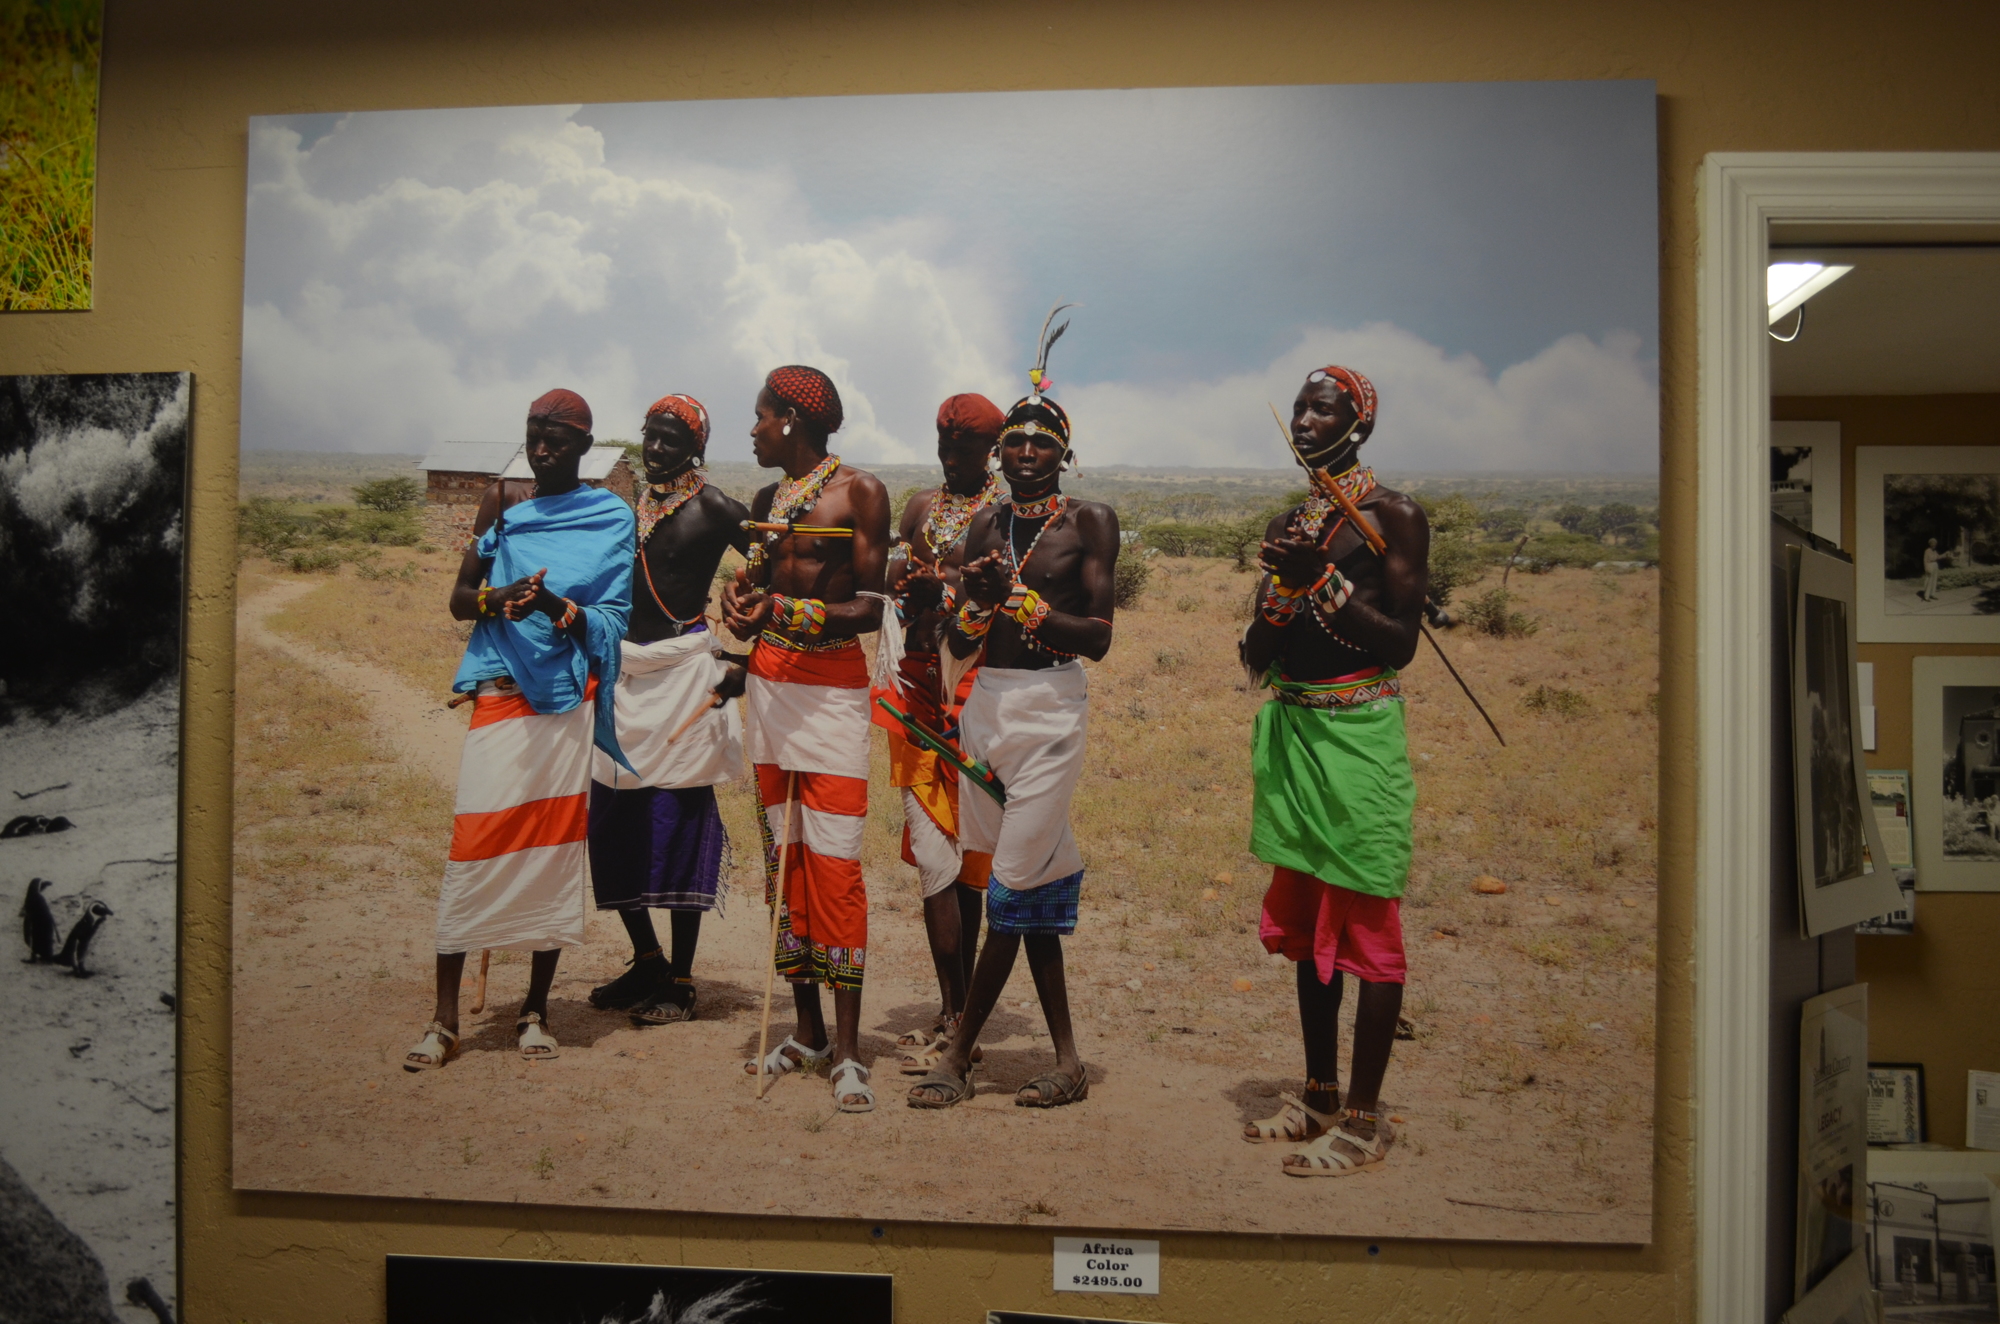 Studio 41 displays Berns' photos from his world travels to places including Africa, Cuba, Russia and more.